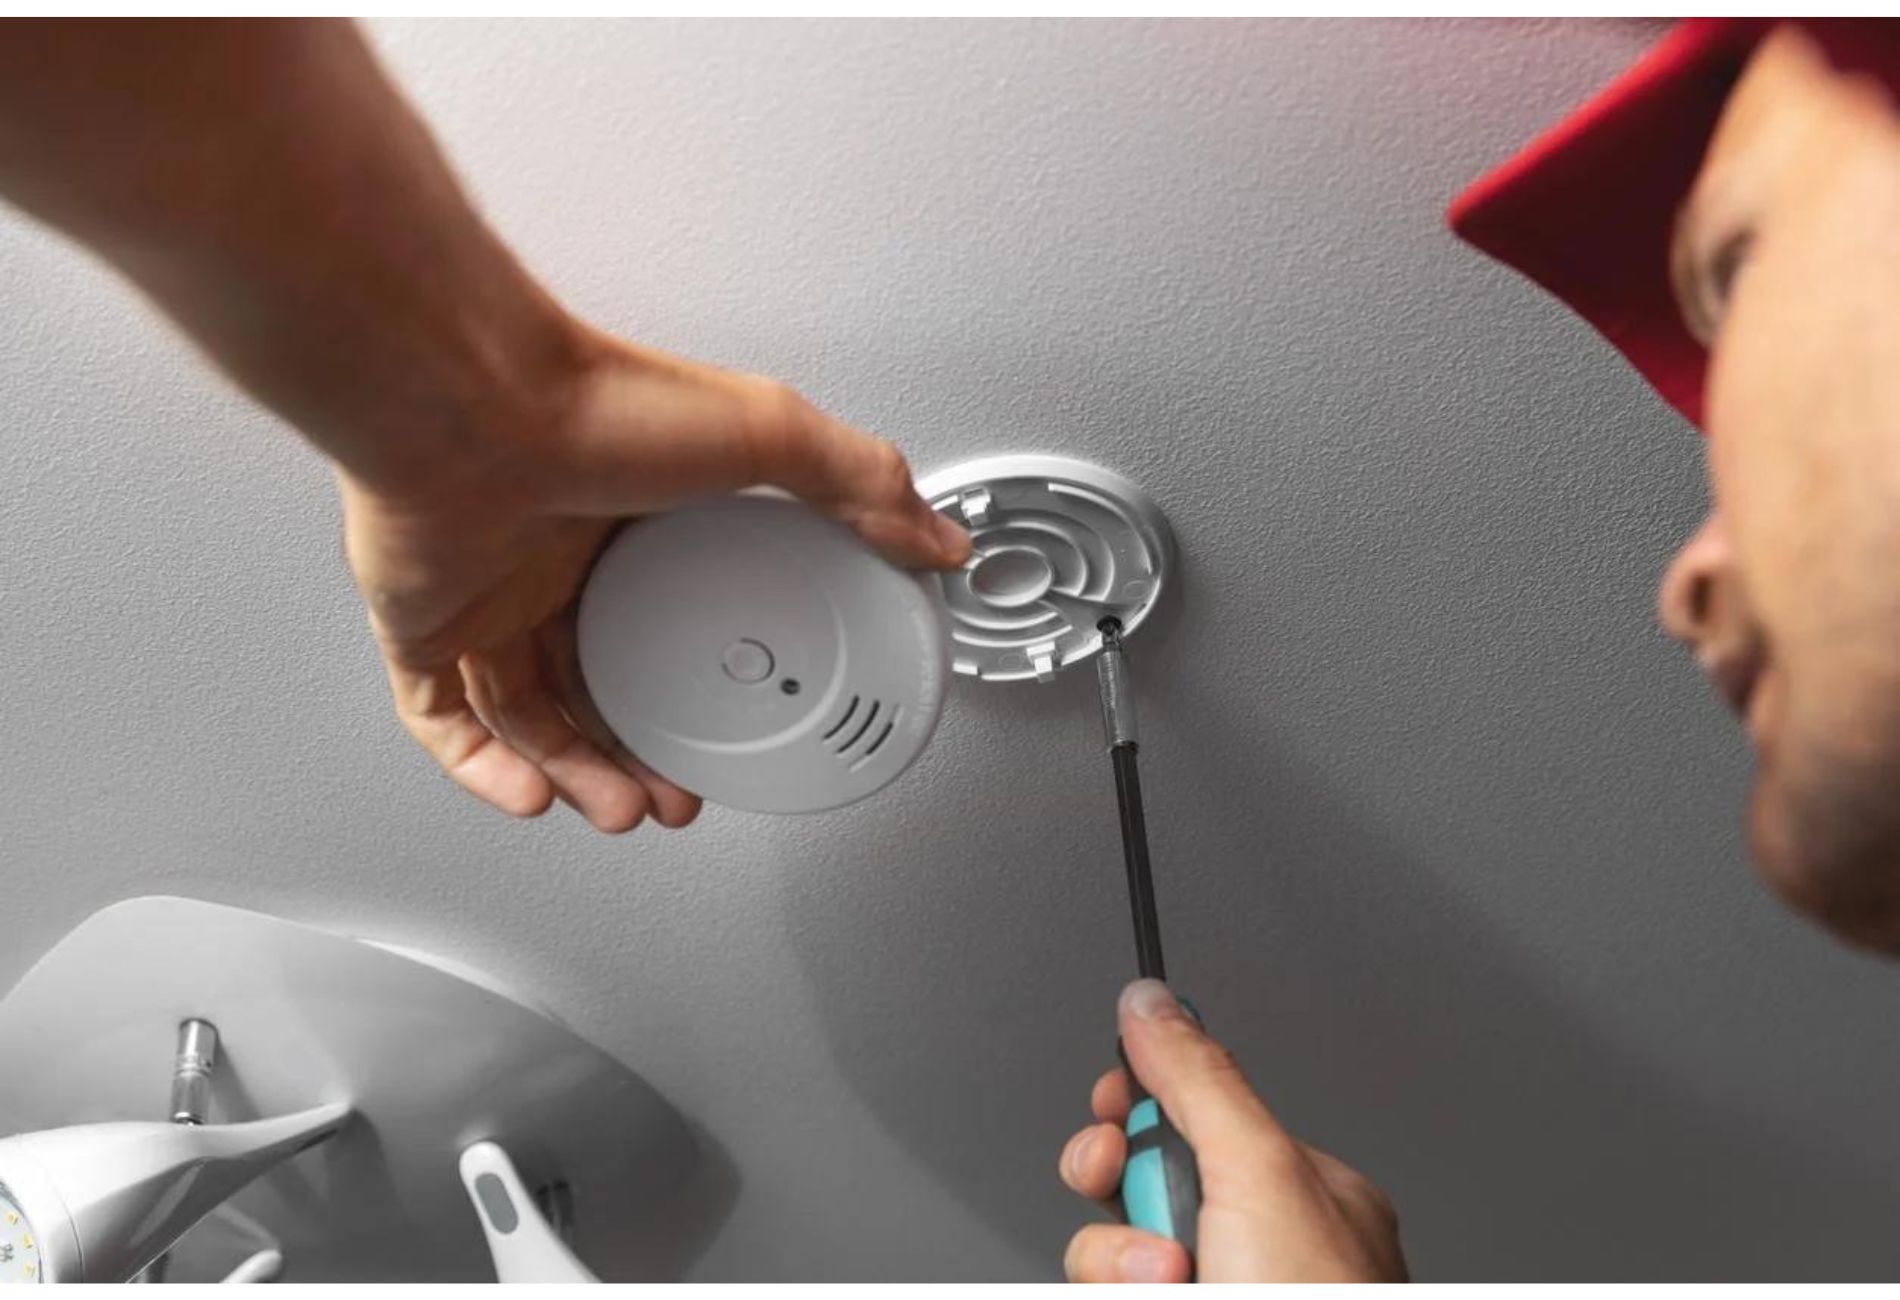 How To Mount A Smoke Detector